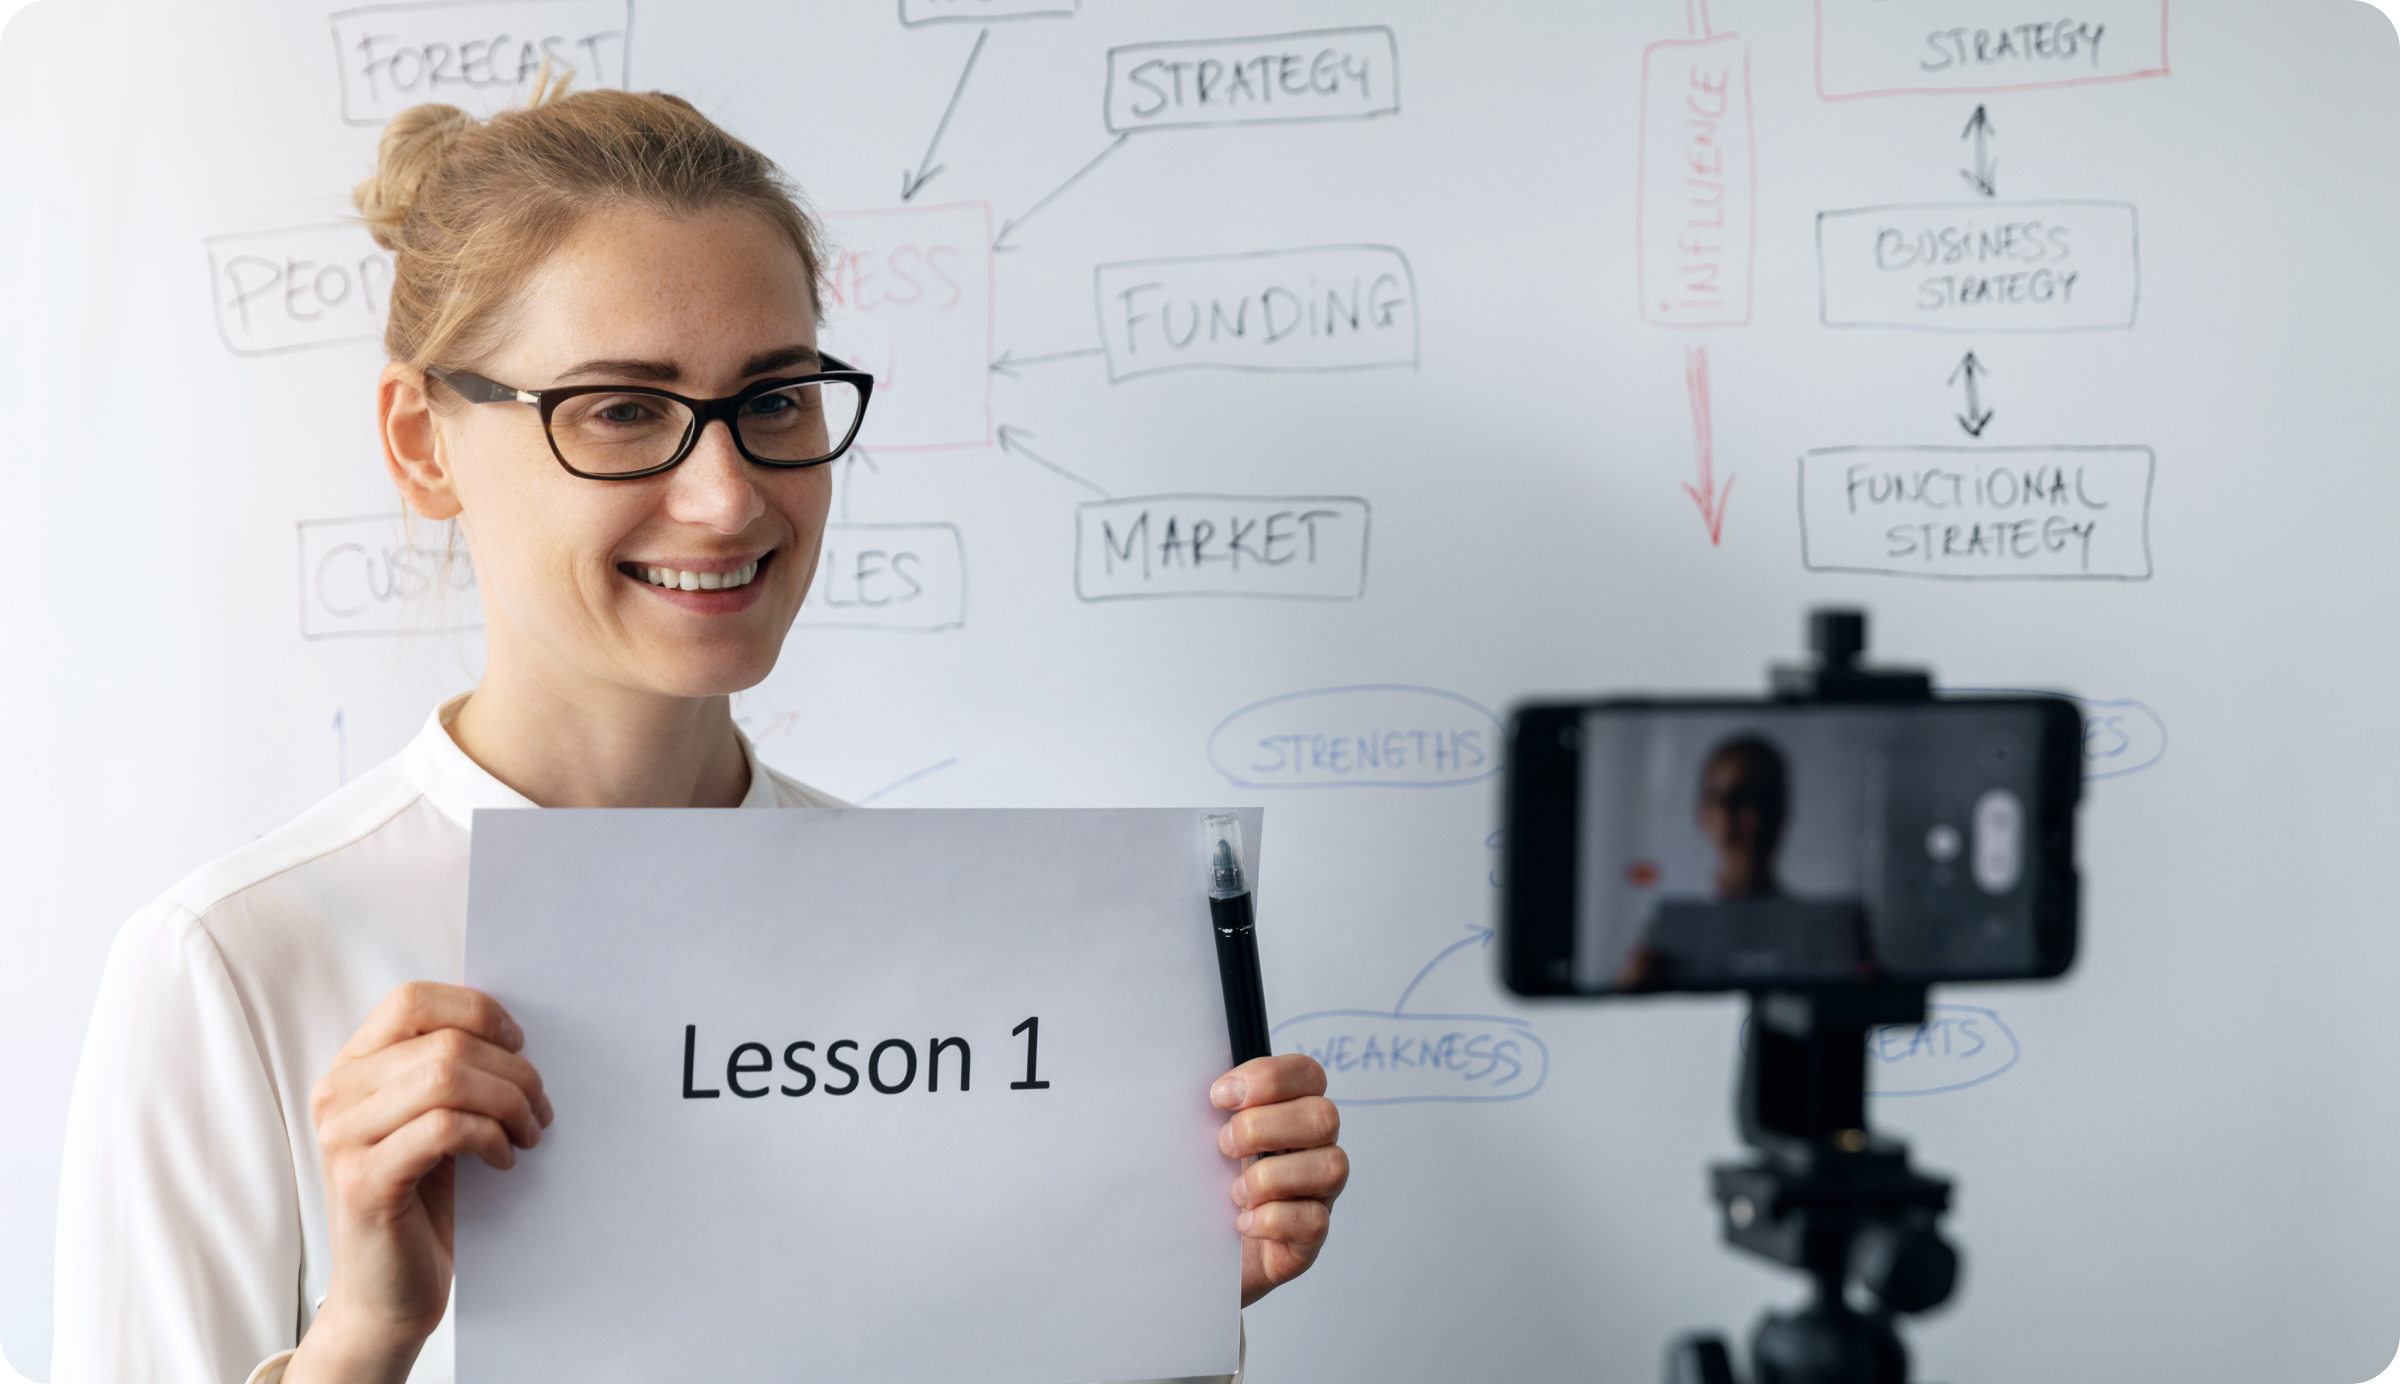 5 Ways to Make an Awesome Classroom Video